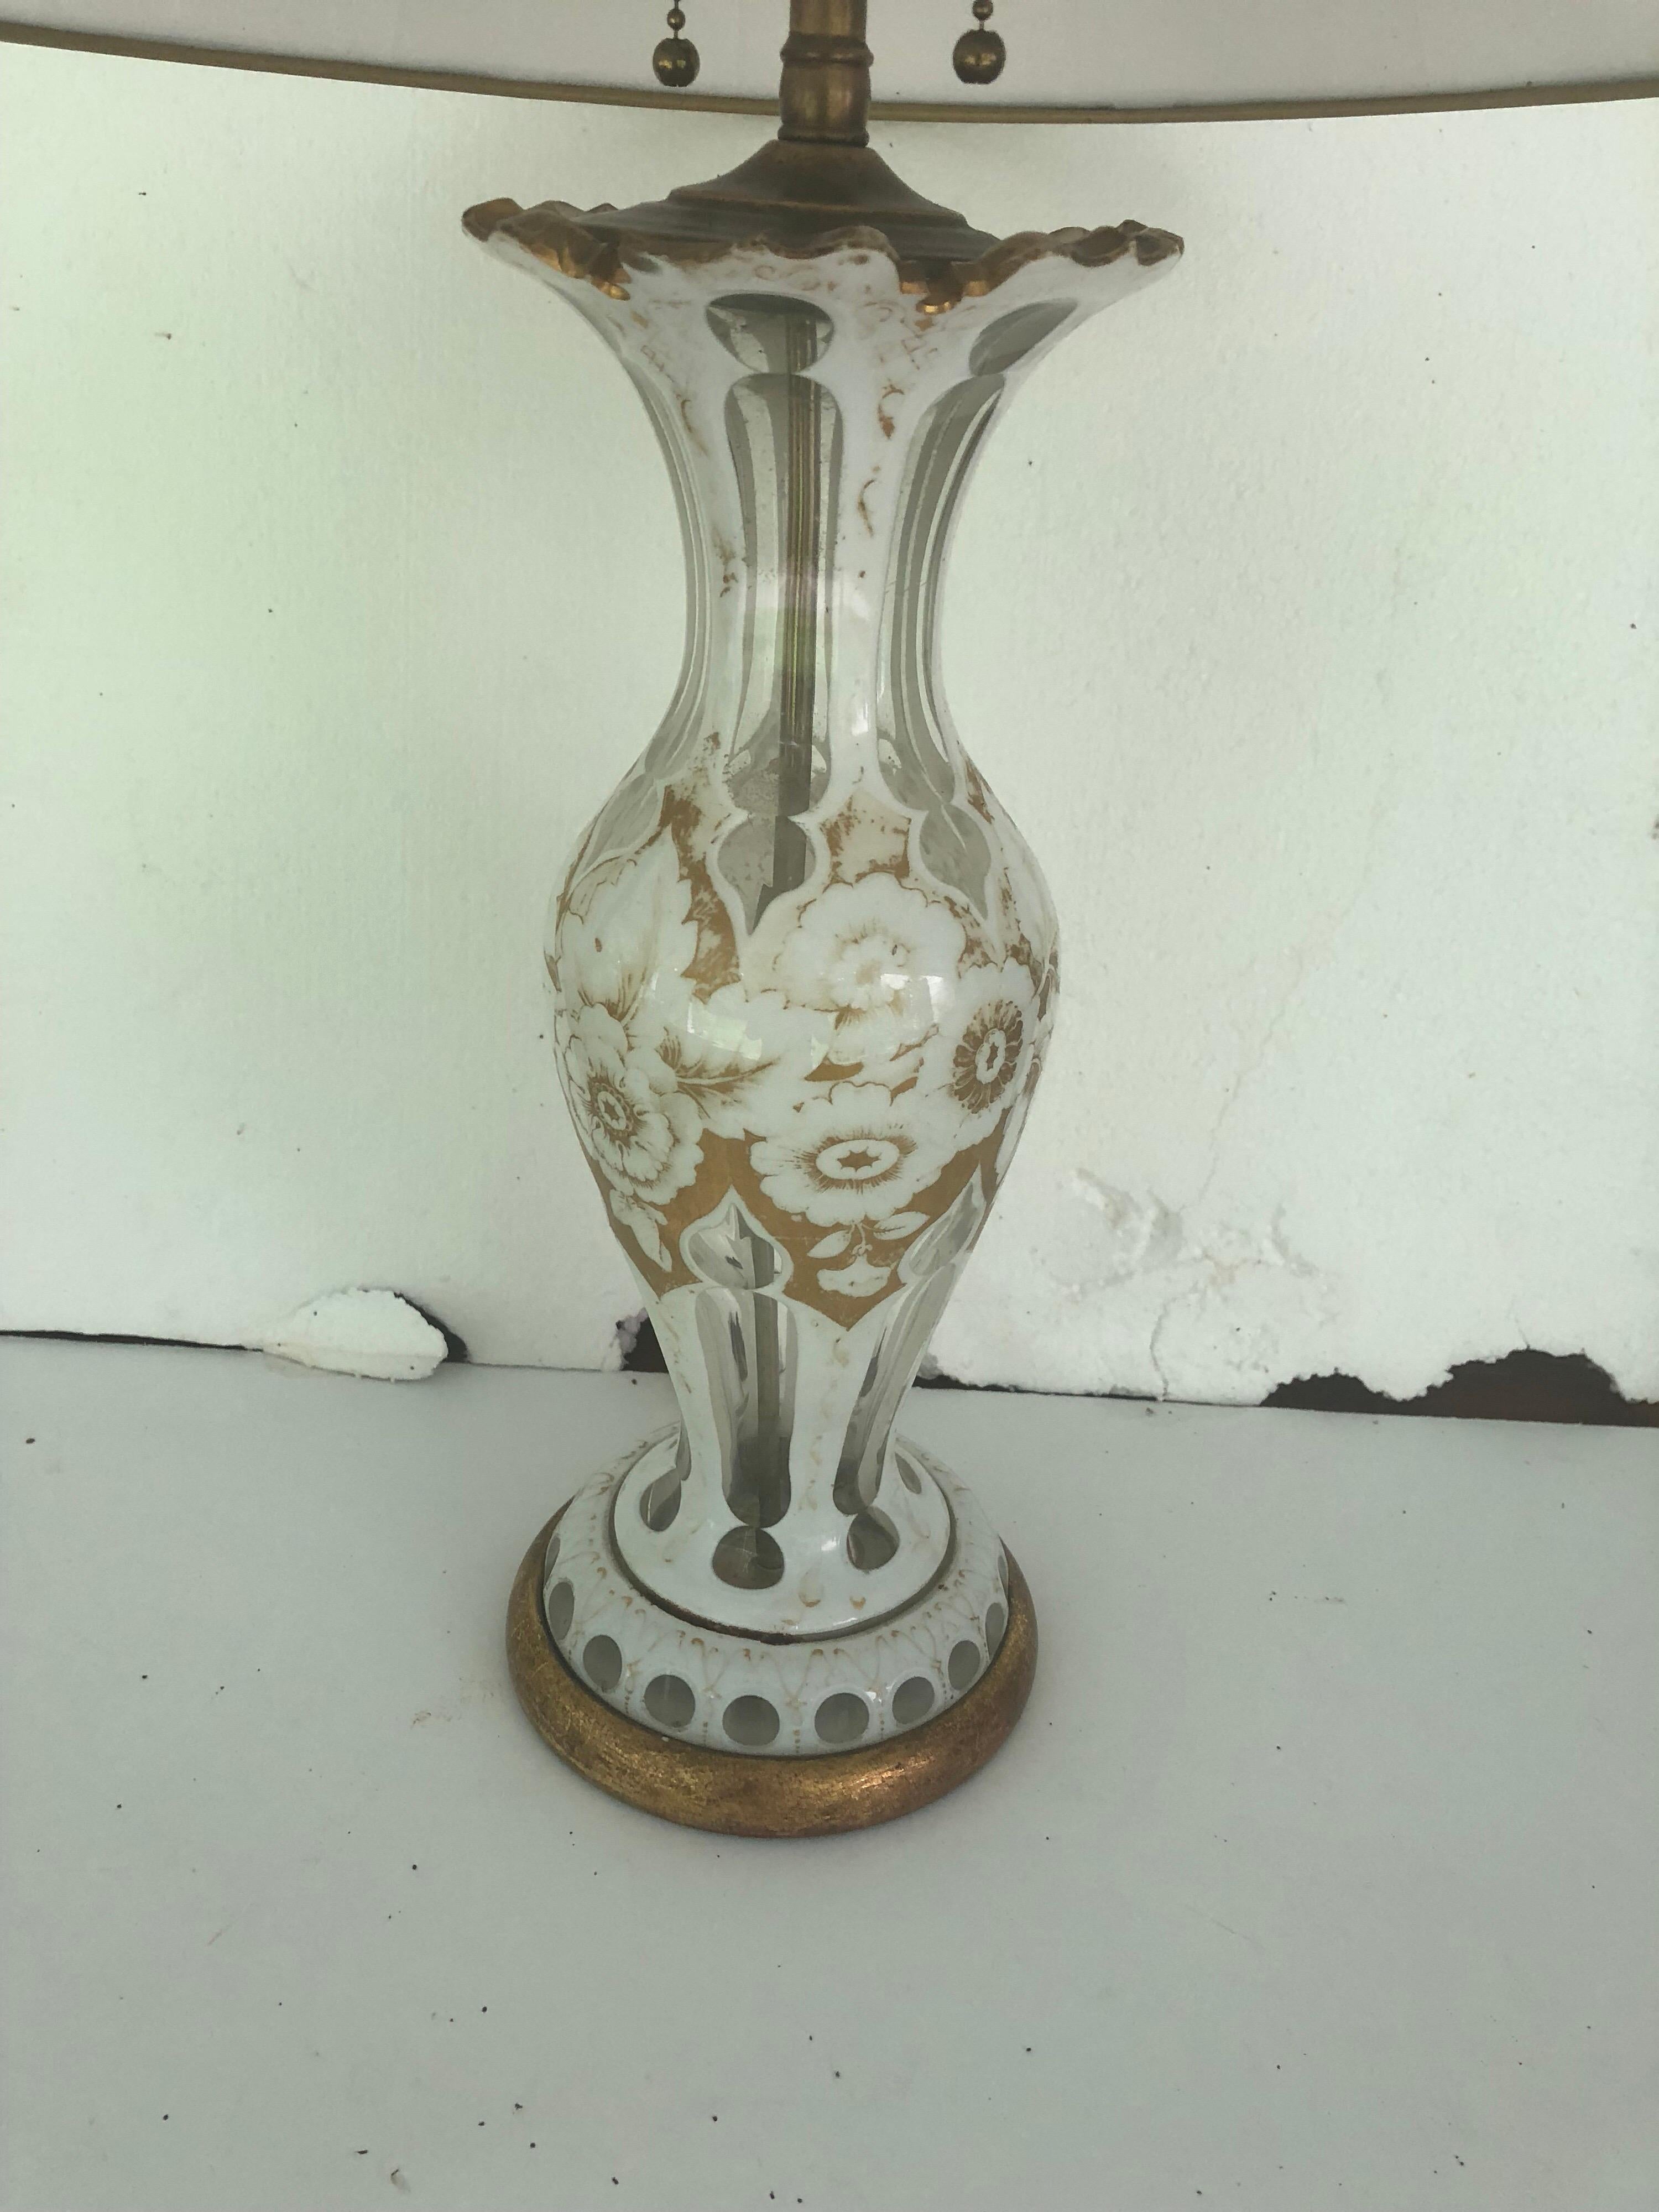 French glass lamp with gold and white floral decorations, on a gilded wooden base. Recently rewired. Shade not included. Height 24